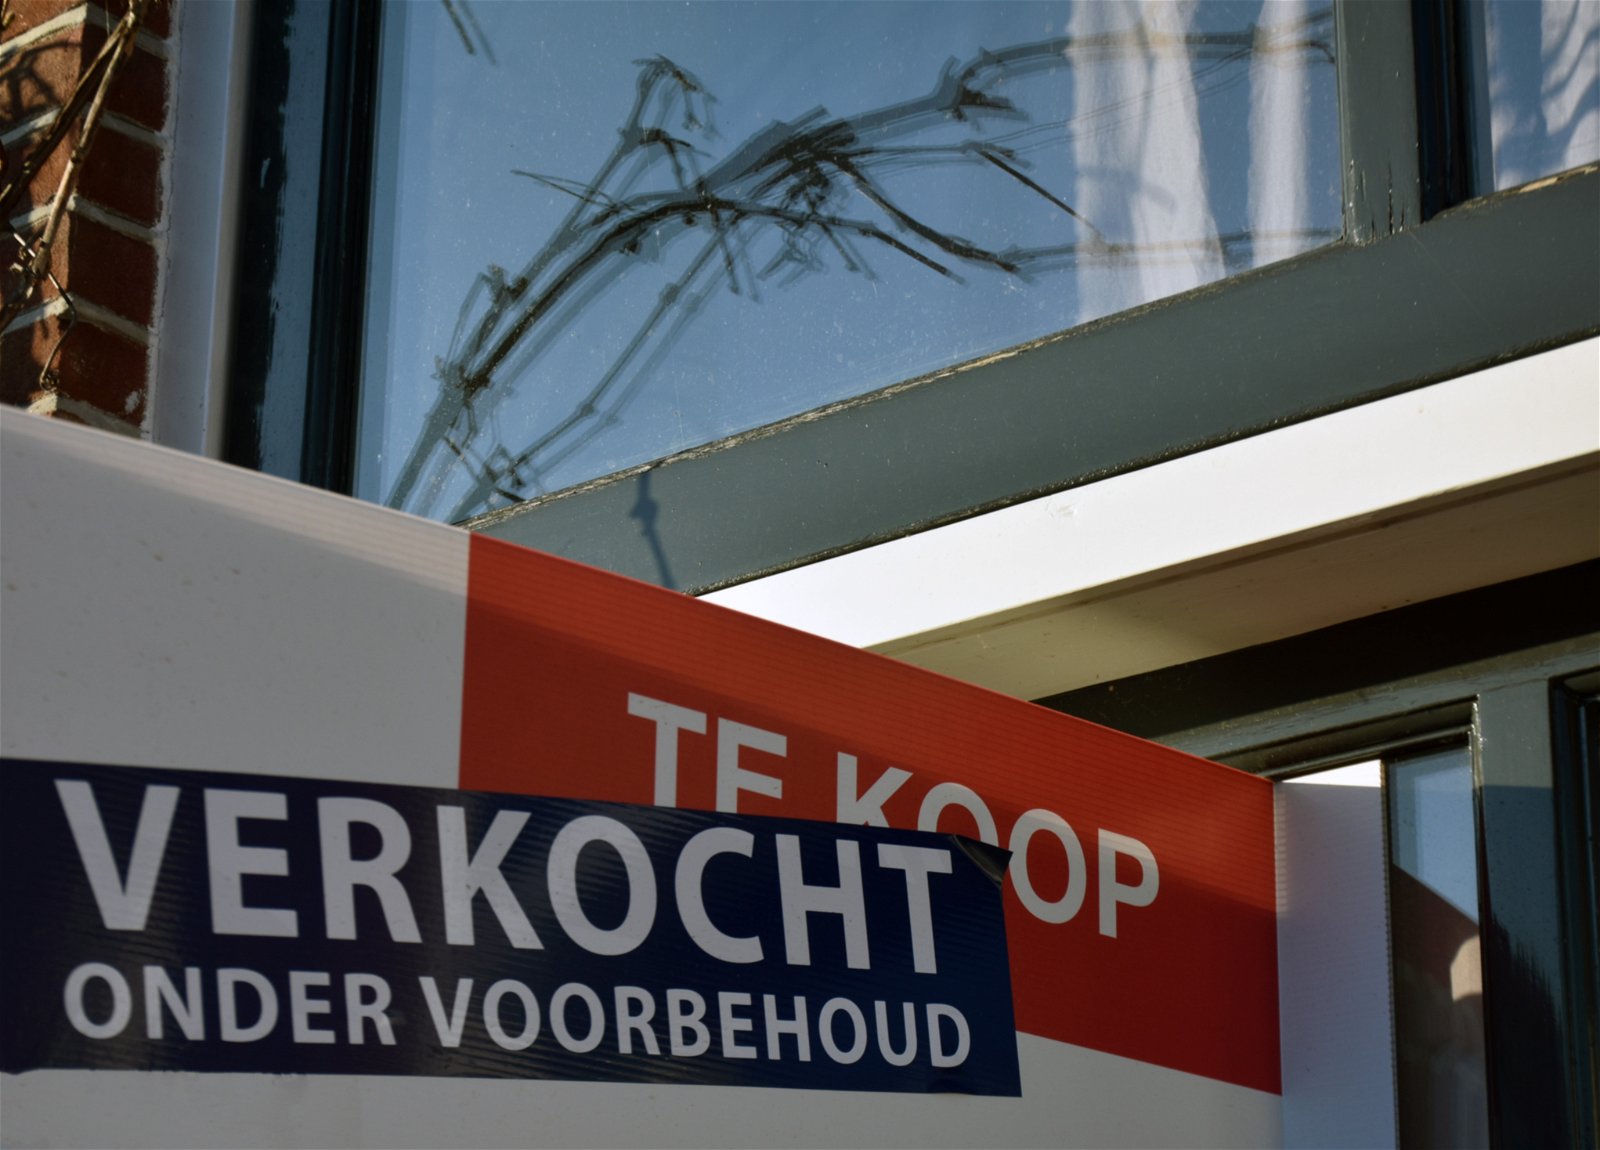 Why do Belgians buy a house in a Dutch border area?